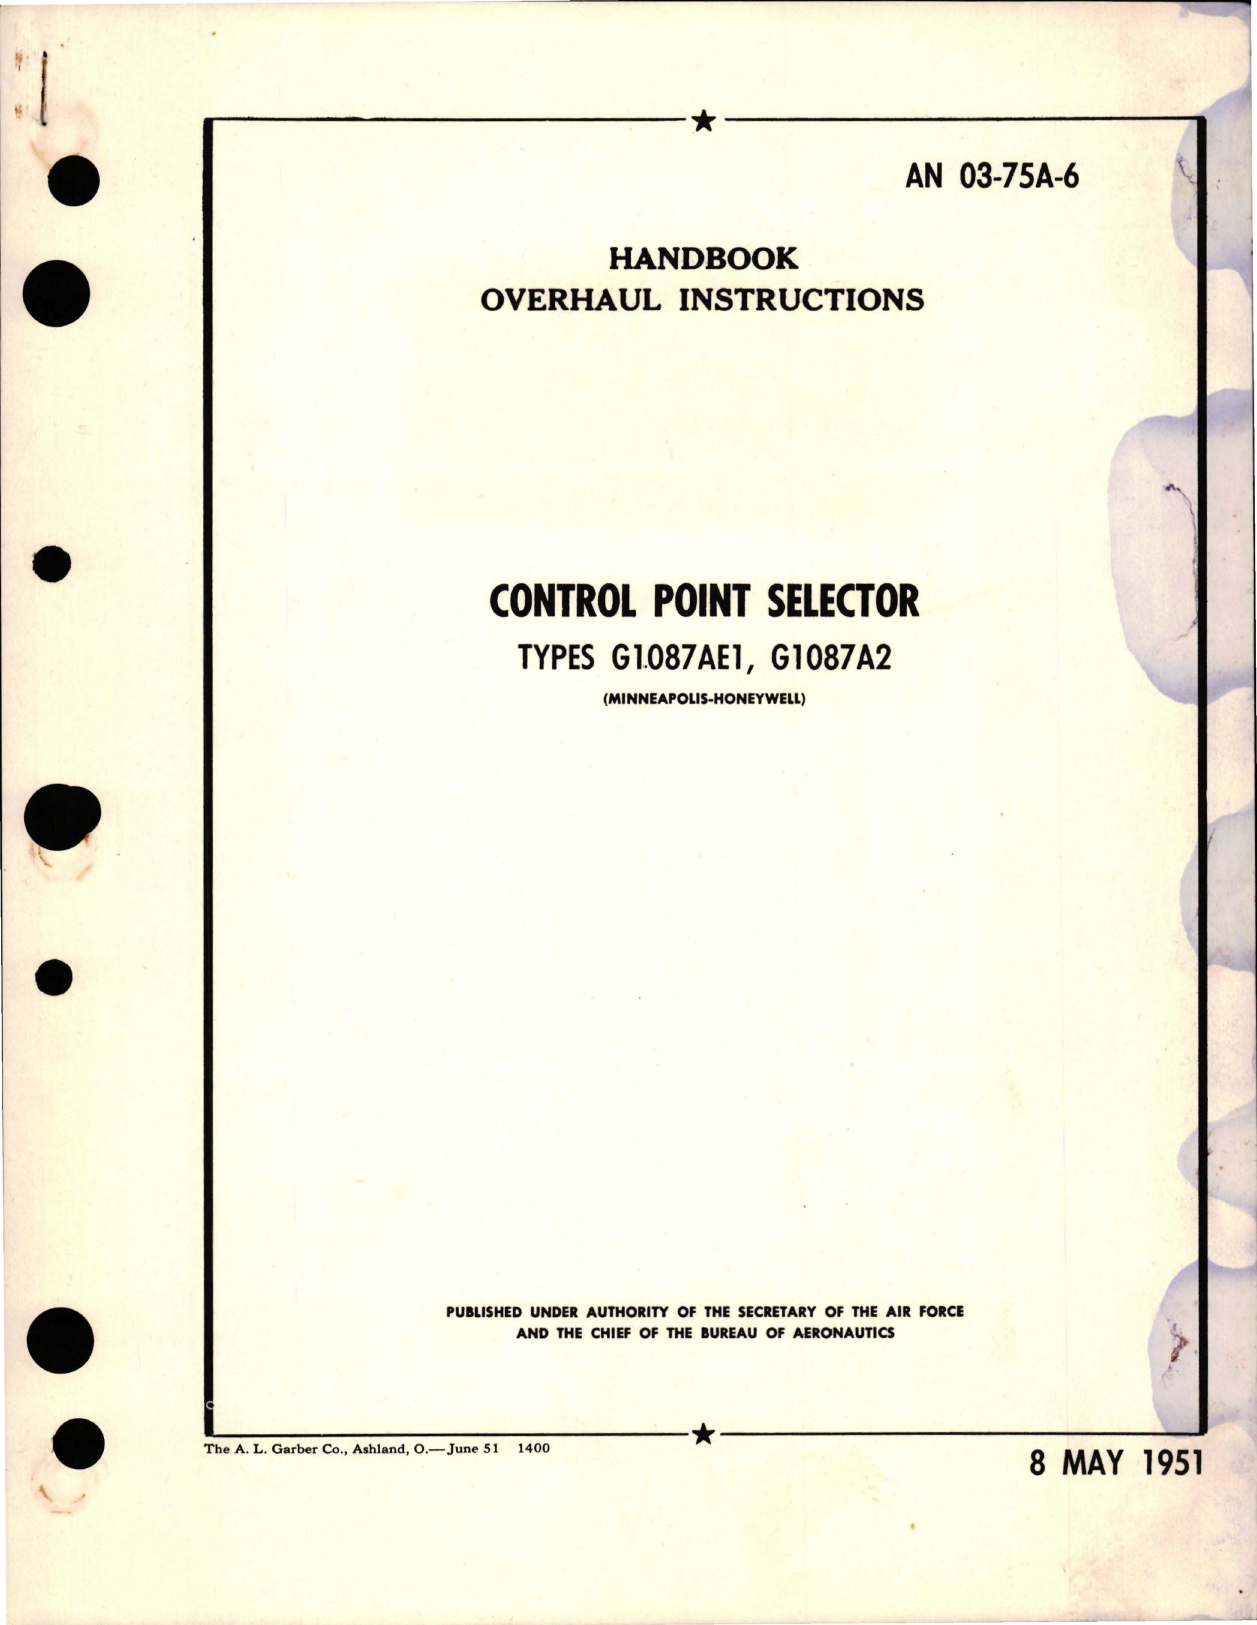 Sample page 1 from AirCorps Library document: Overhaul Instructions for Control Point Selector - Types G1087AE1 and G1087A2